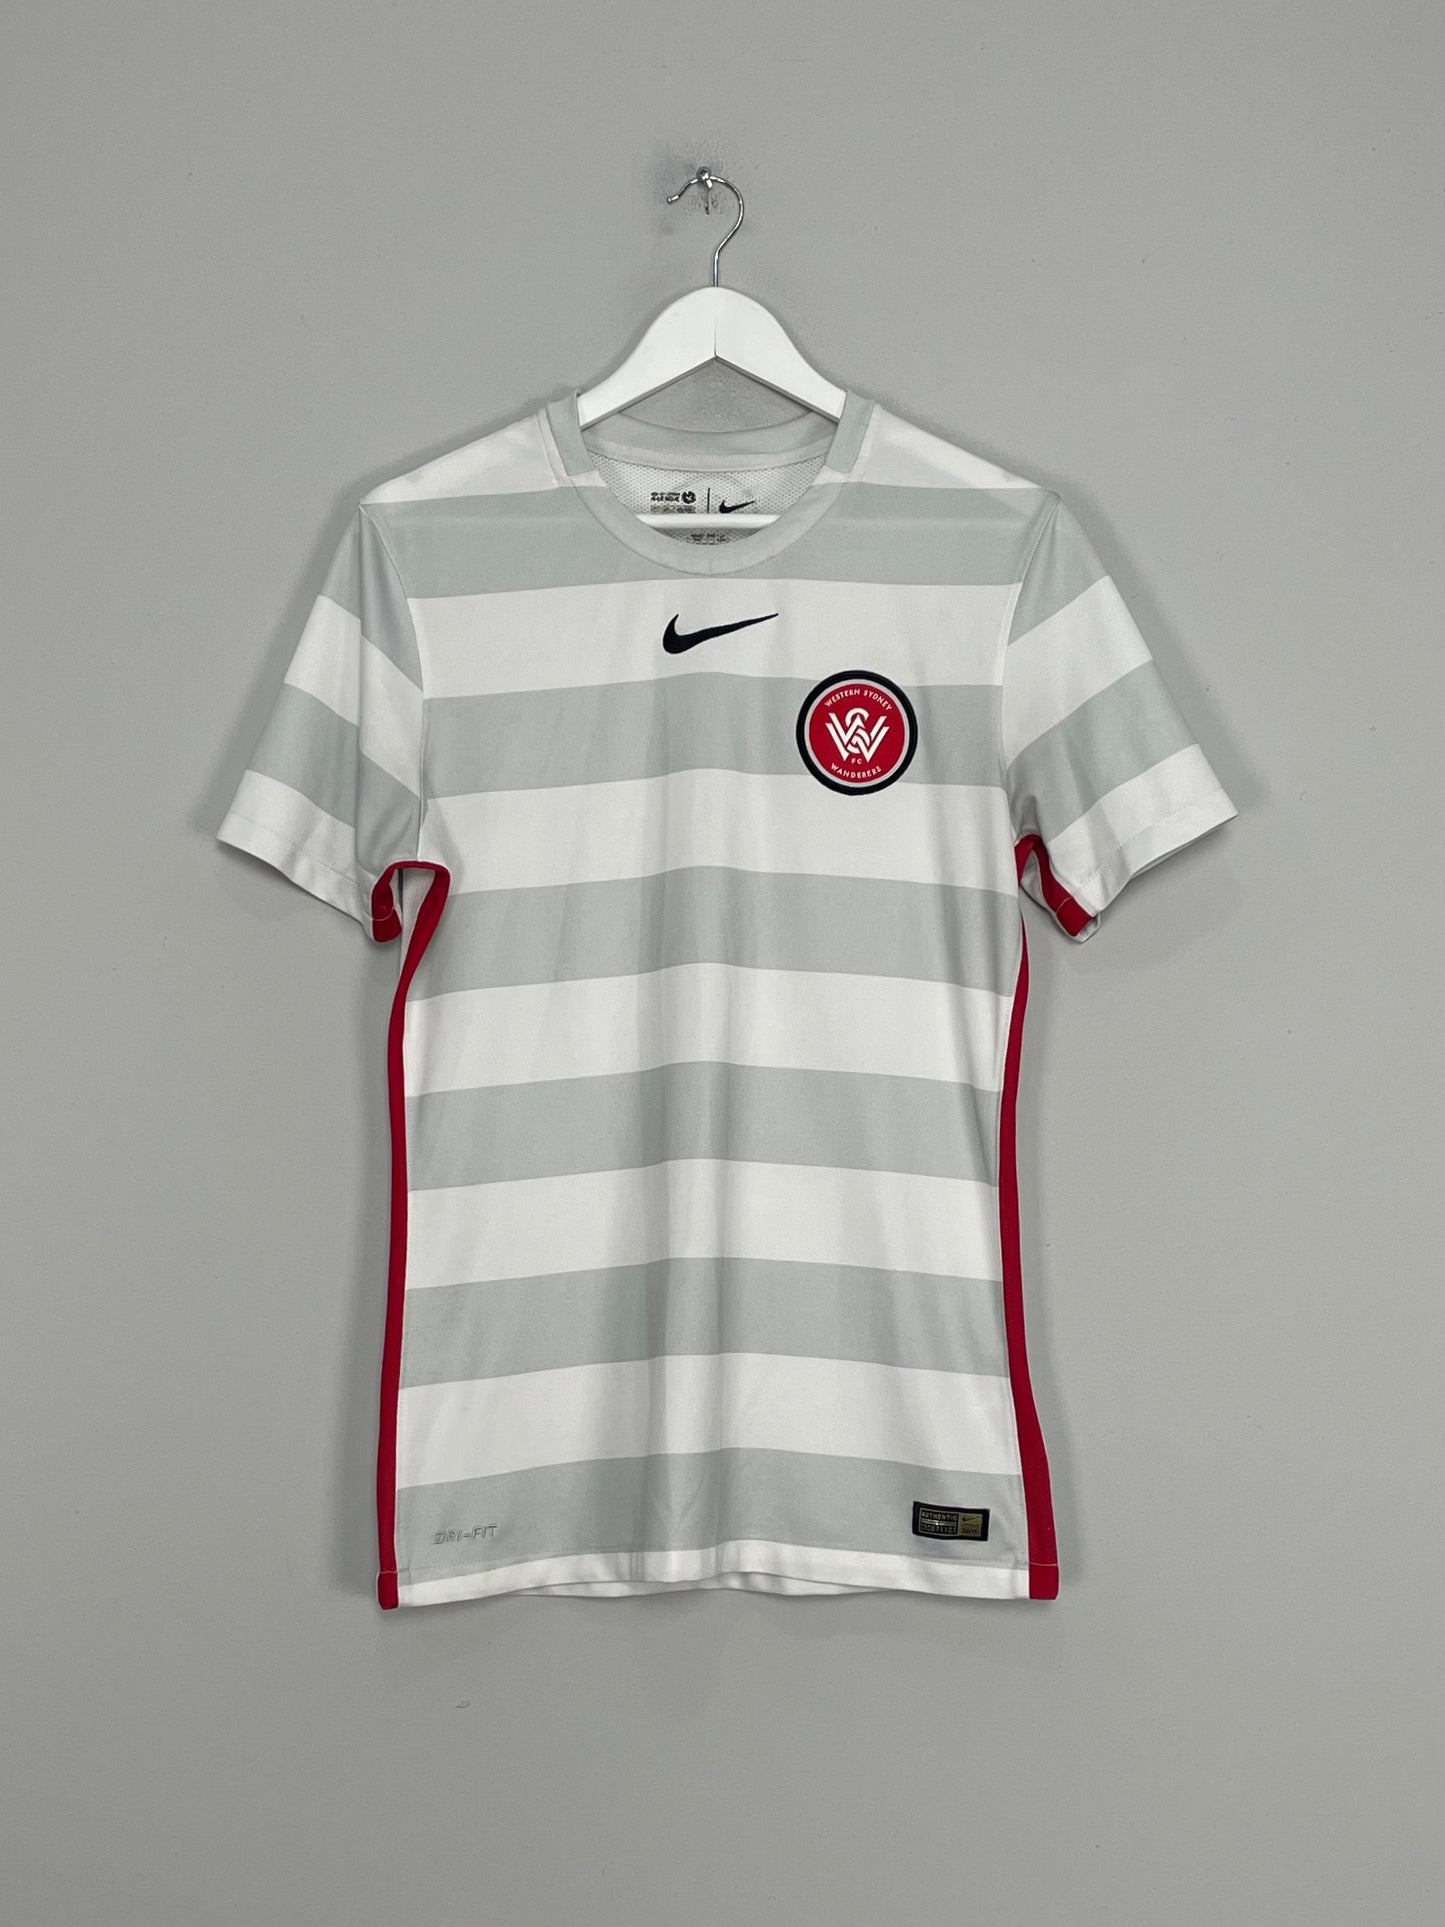 Image of the Western Sydney shirt from the 2015/16 season